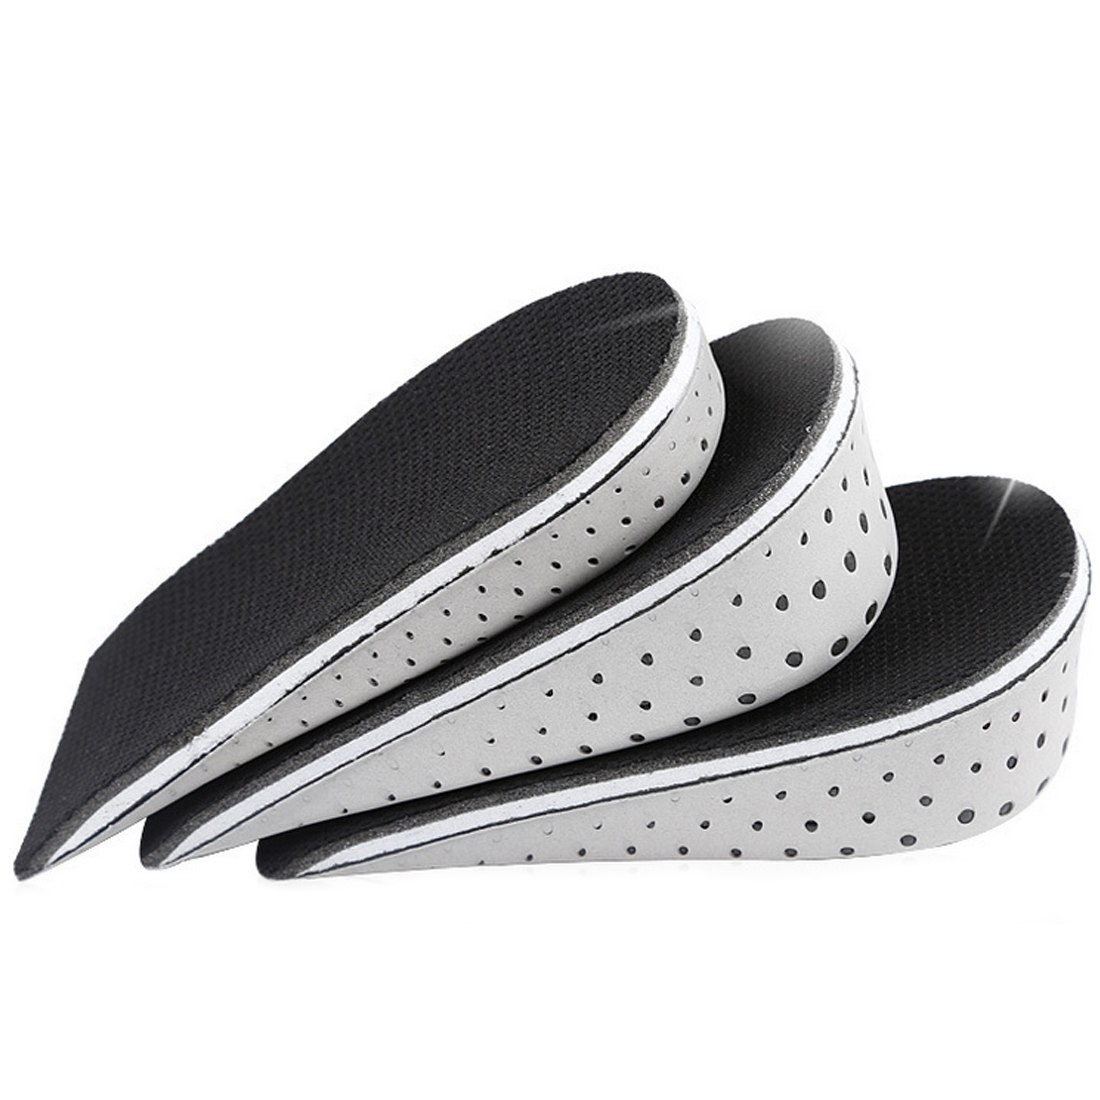 1 Pair Comfortable Orthotic Shoes Insoles Inserts High Arch 2-4cm Support Pad for women men Lift Insert Pad Height Cushion